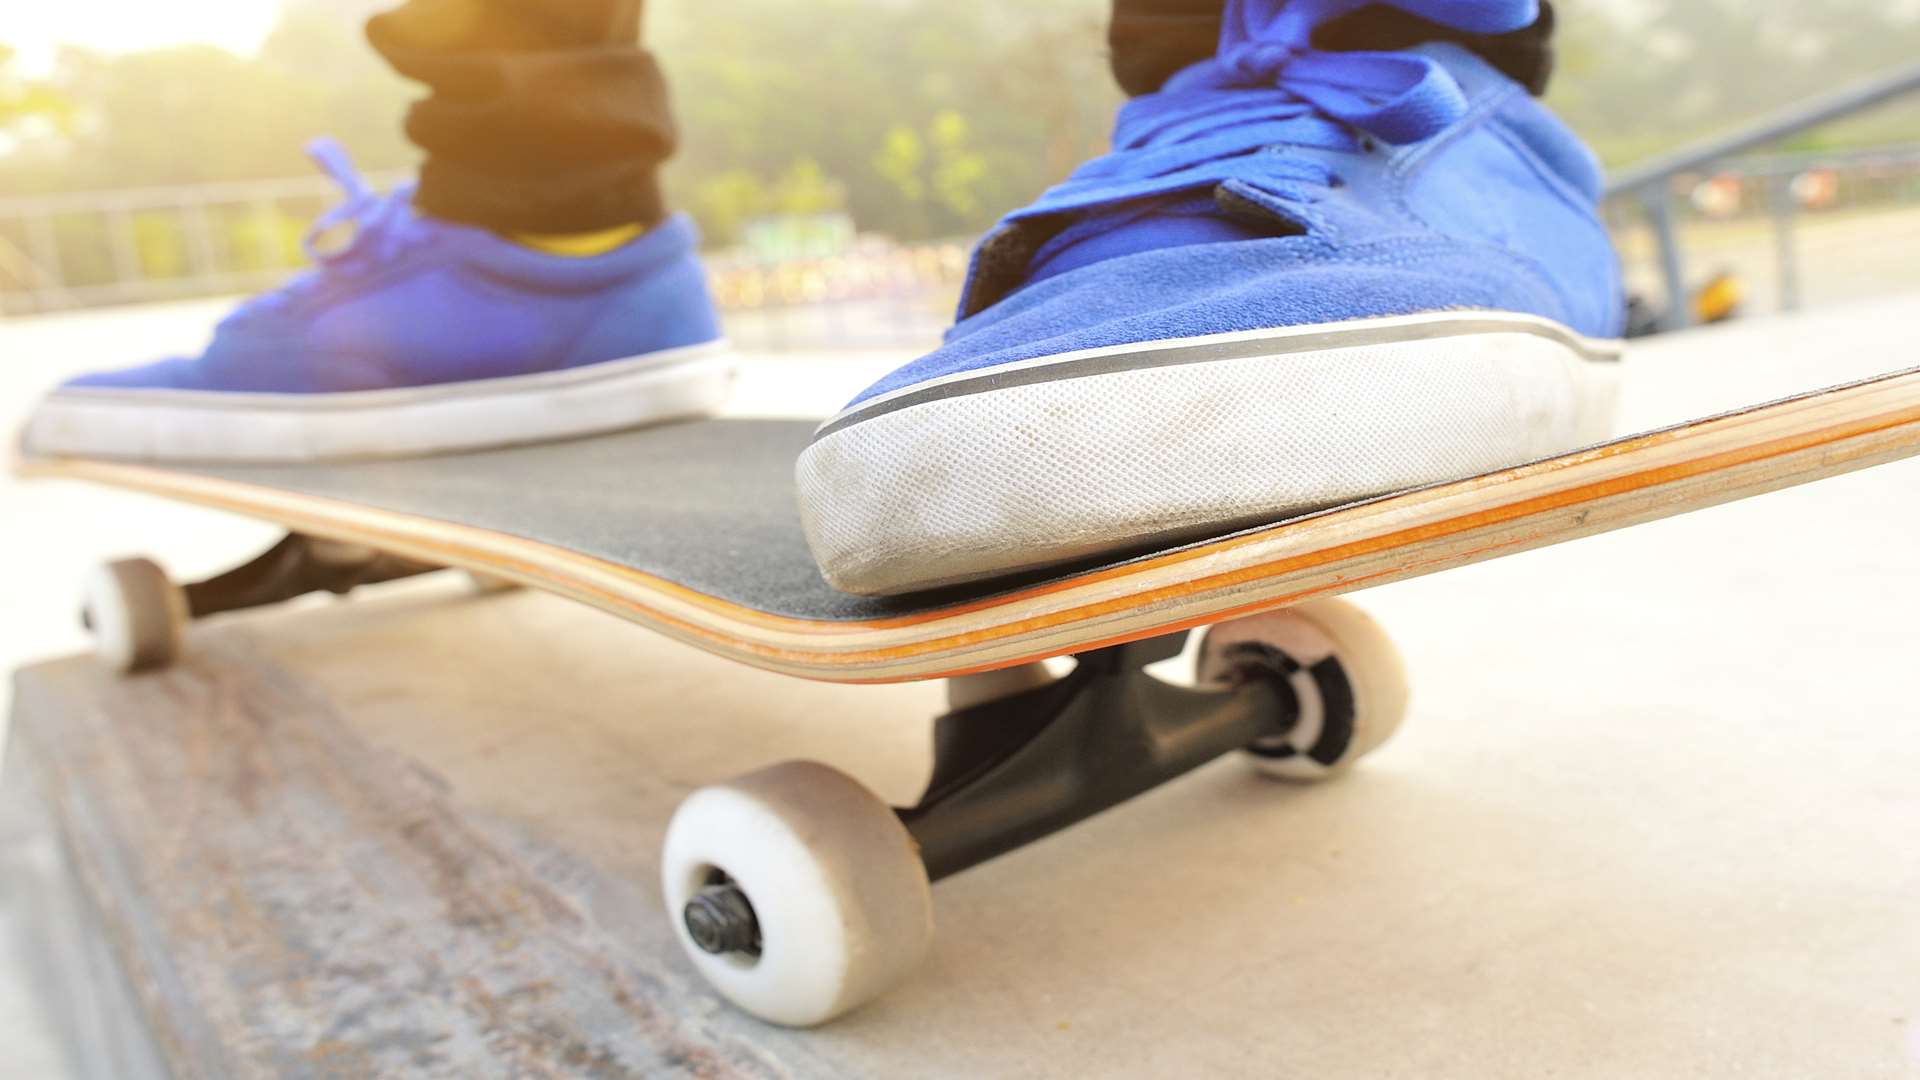 A new skate park is planned in Aylesham